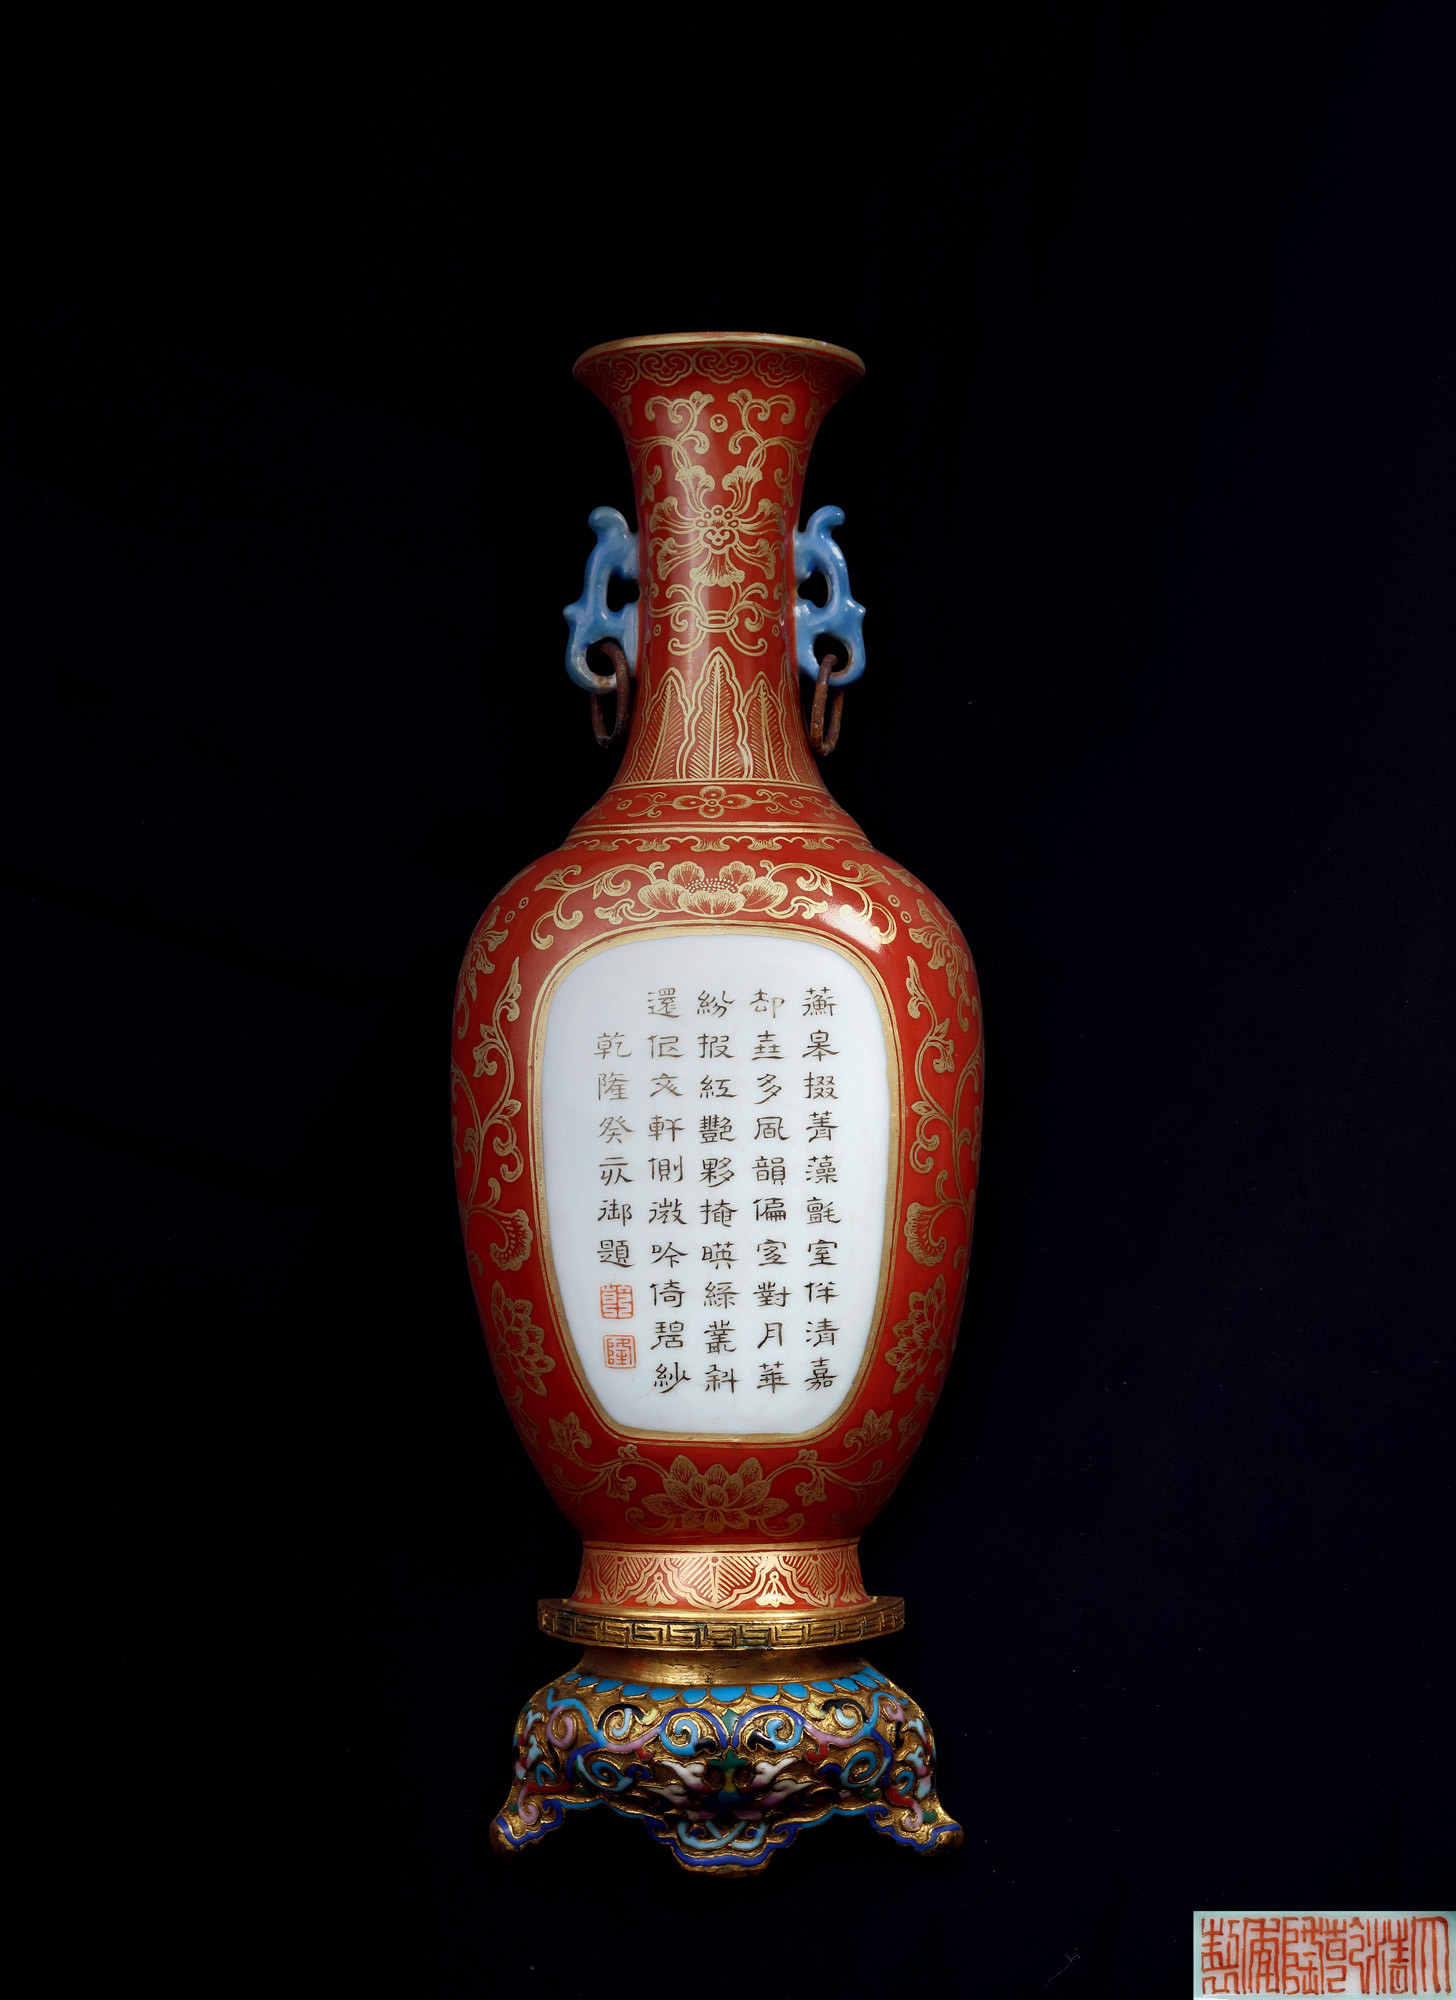 AN EXTREMELY RARE AND FINELY IMPERIAL CORAL-RED GROUND WITH‘IMPERIAL INSCRIPTION’VASE, BIPING